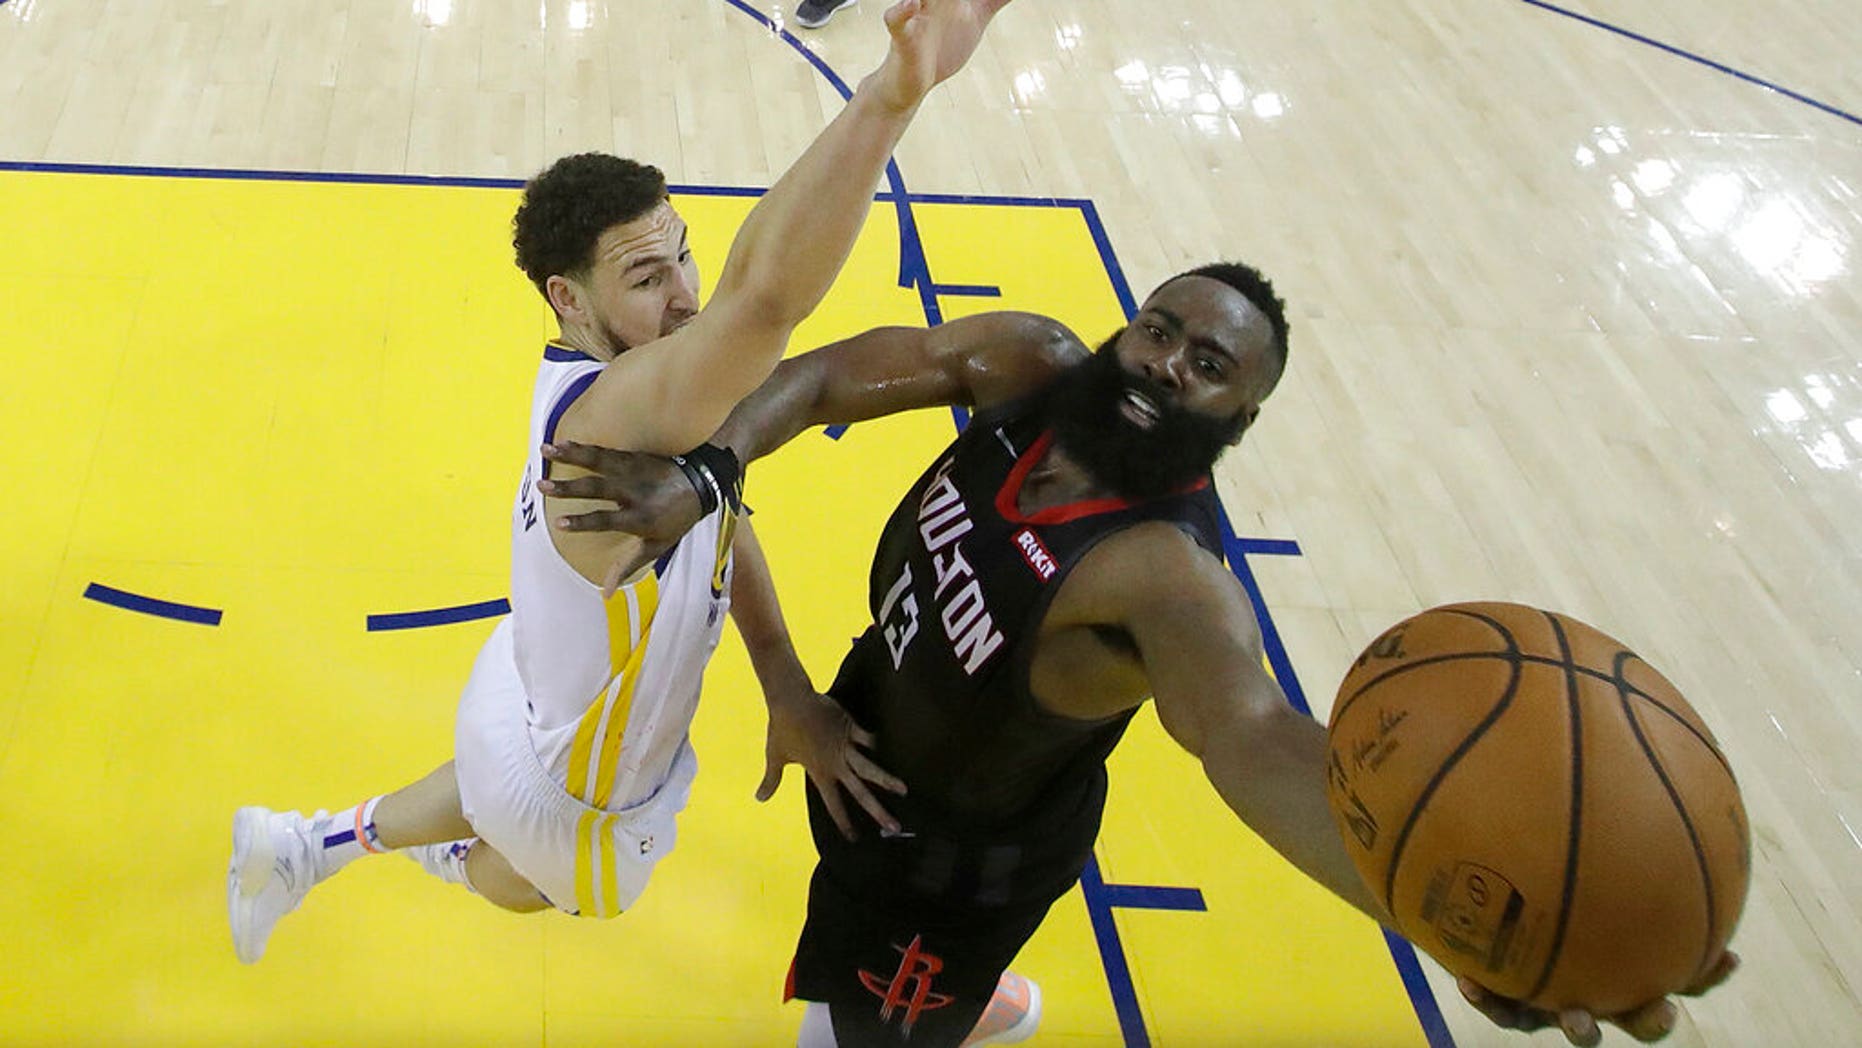 Houston Rockets guard James Harden, right, shoots against Golden State Warriors guard Klay Thompson during the second half of Game 1 of a second-round NBA basketball playoff series in Oakland, Calif.